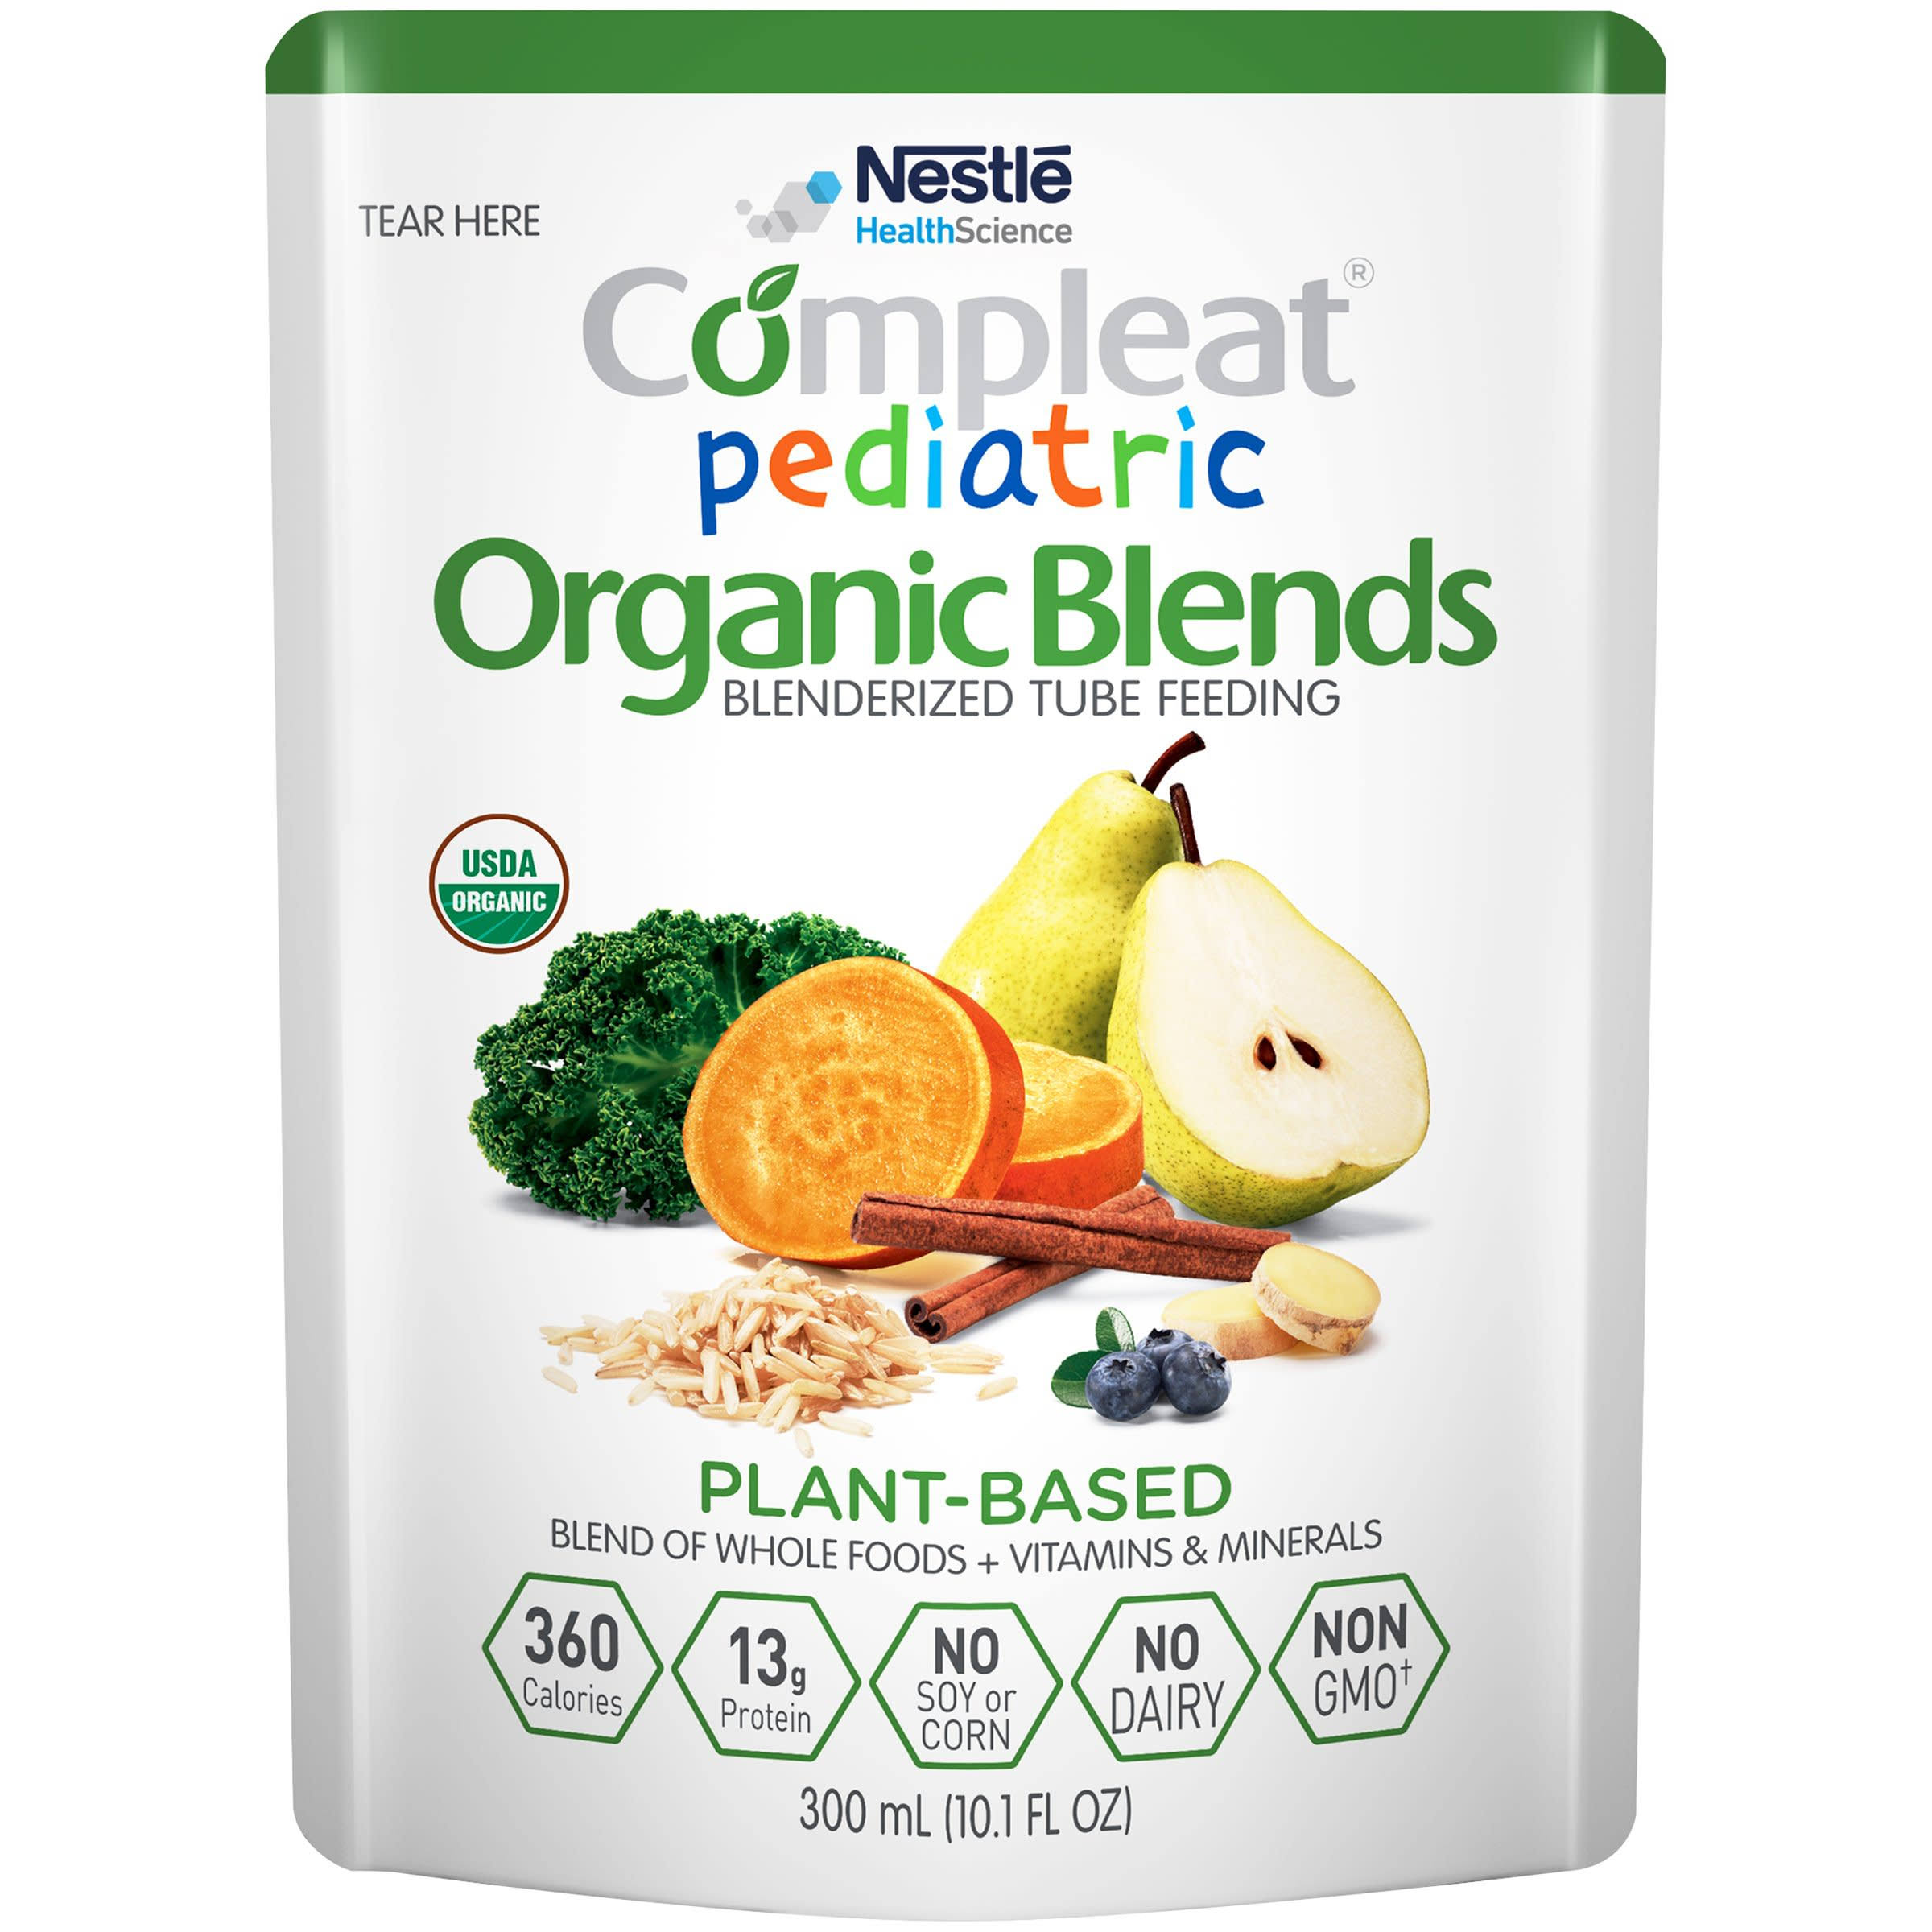 Nestle Healthcare Nutrition Compleat Pediatric Organic Blends Oral Supplement / Tube Feeding Formula